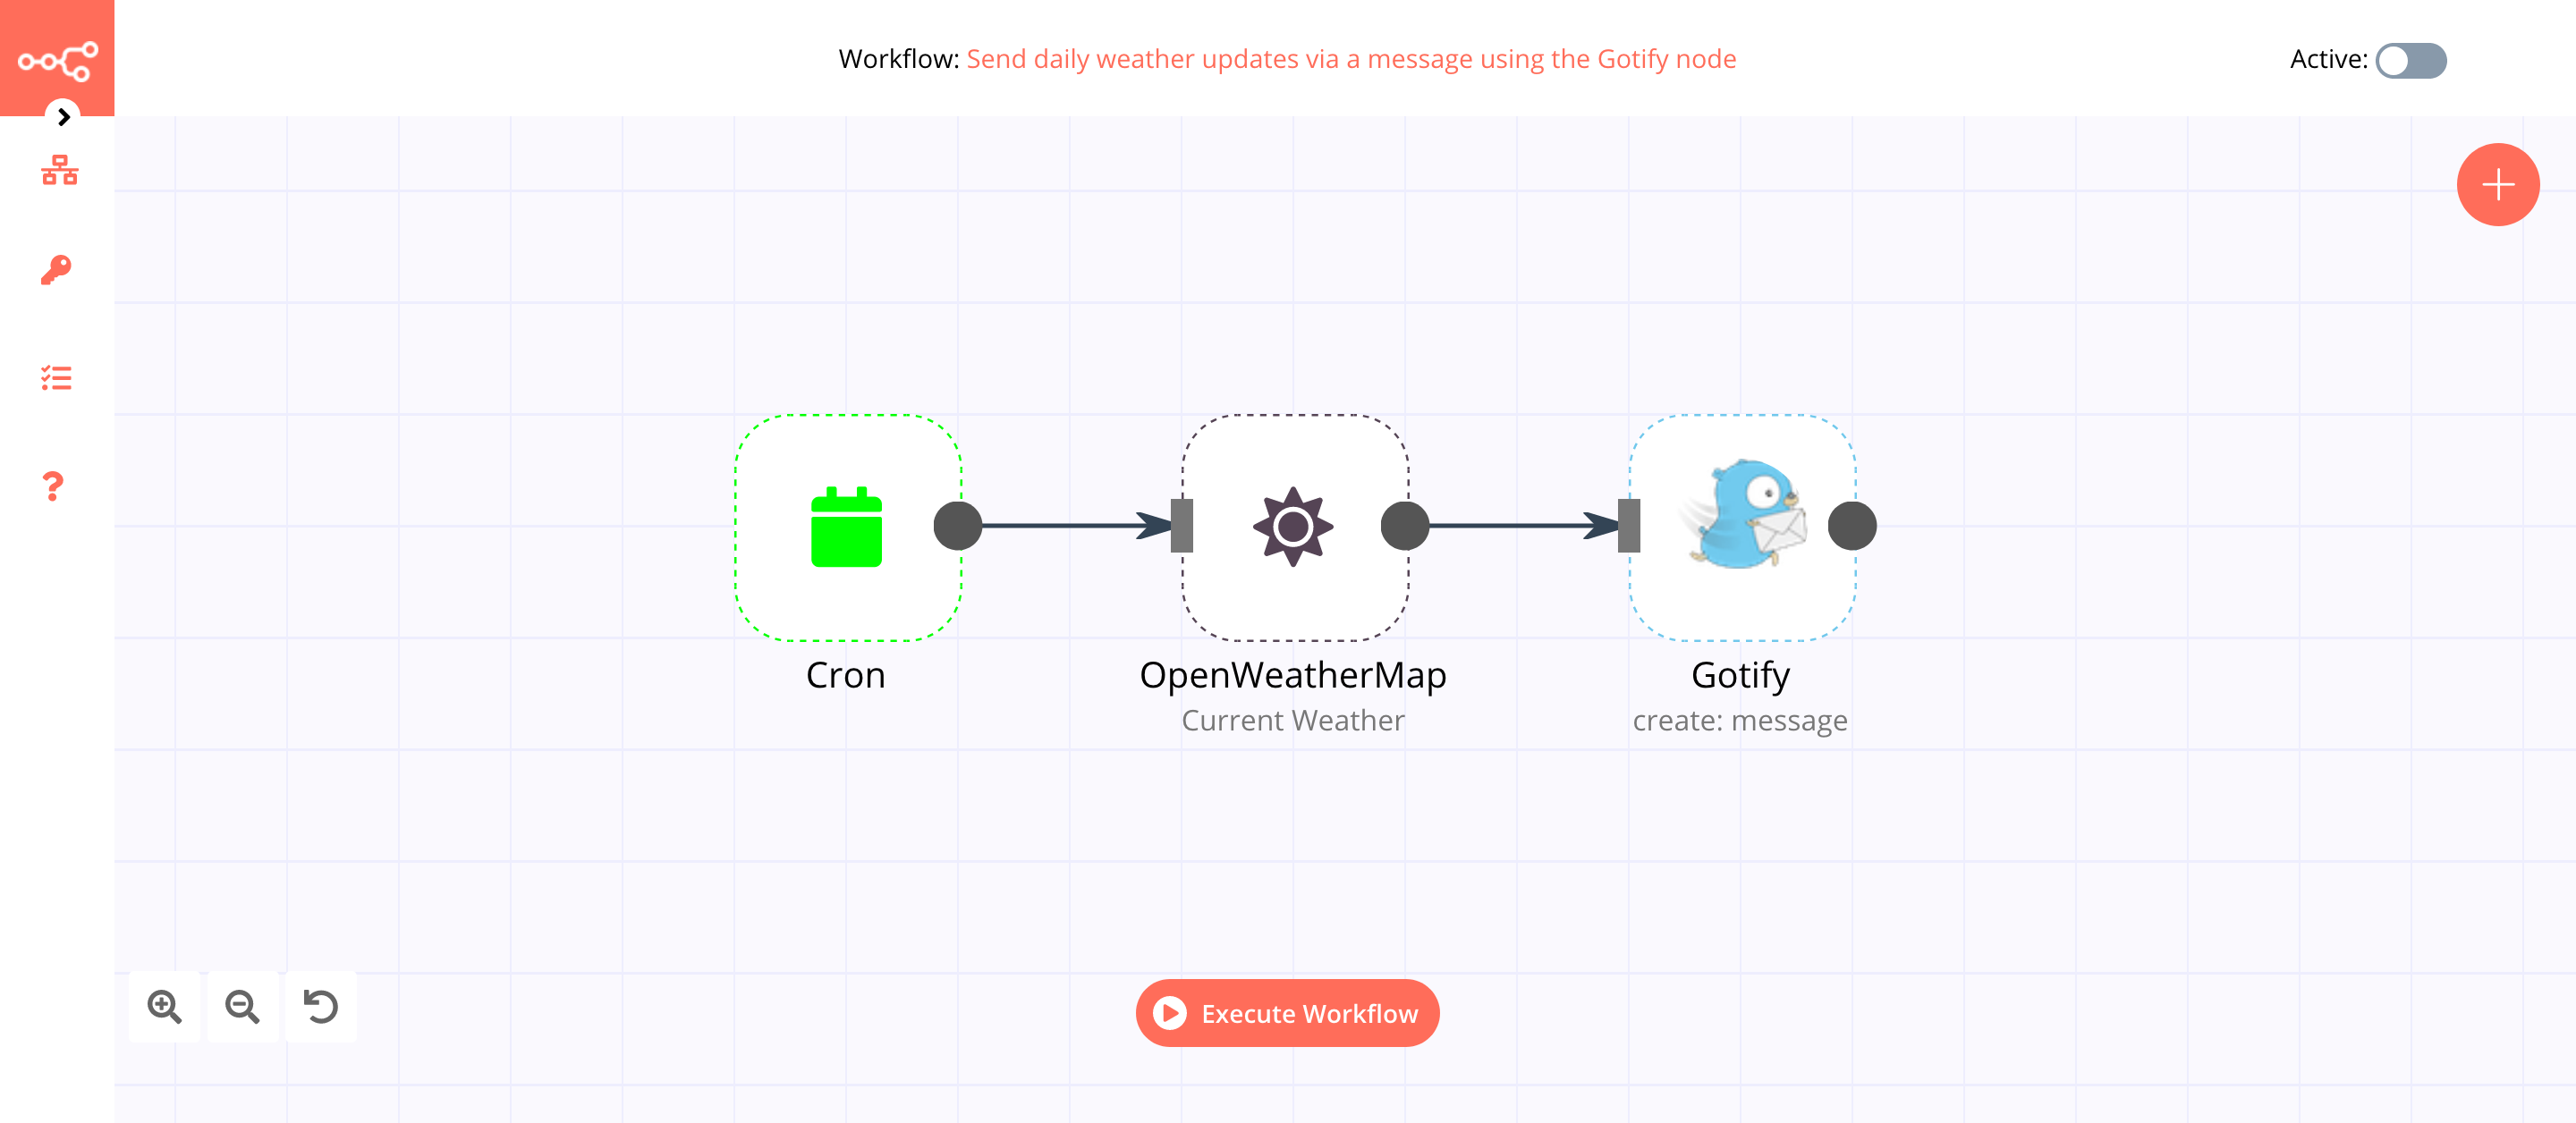 A workflow with the Gotify node